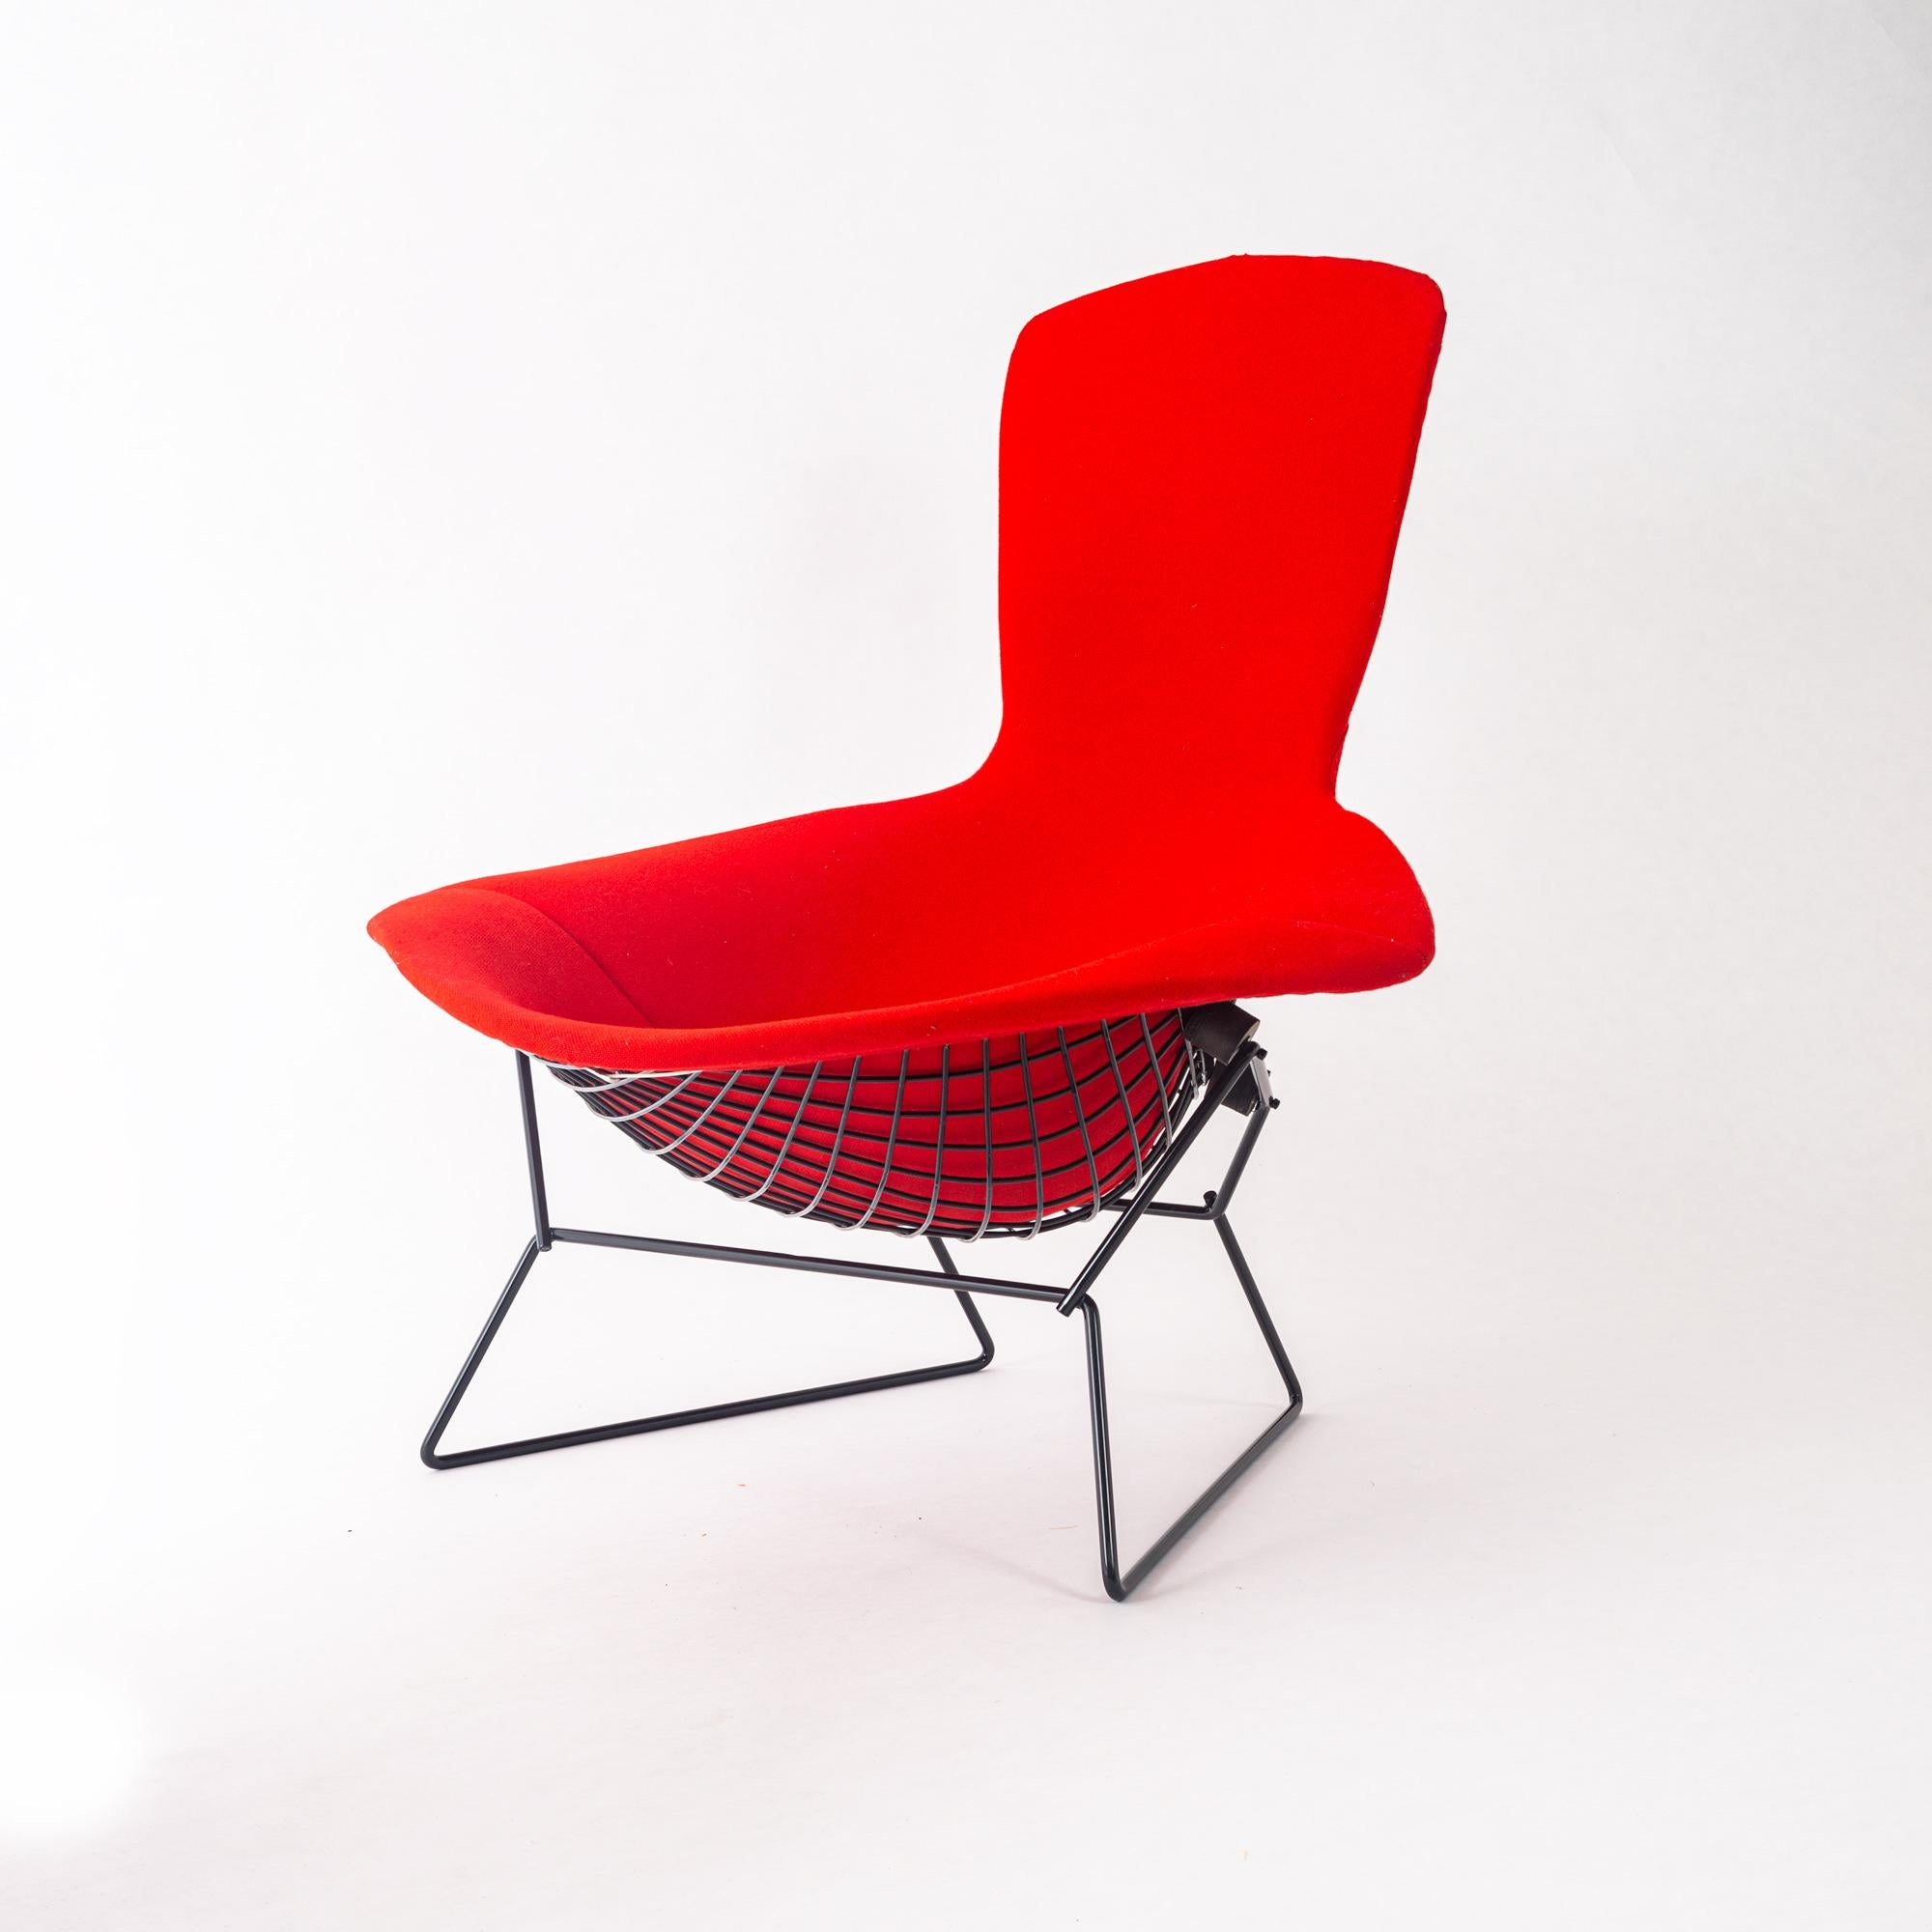 North American Harry Bertoia Bird Chair in Black with Original Knoll Cover